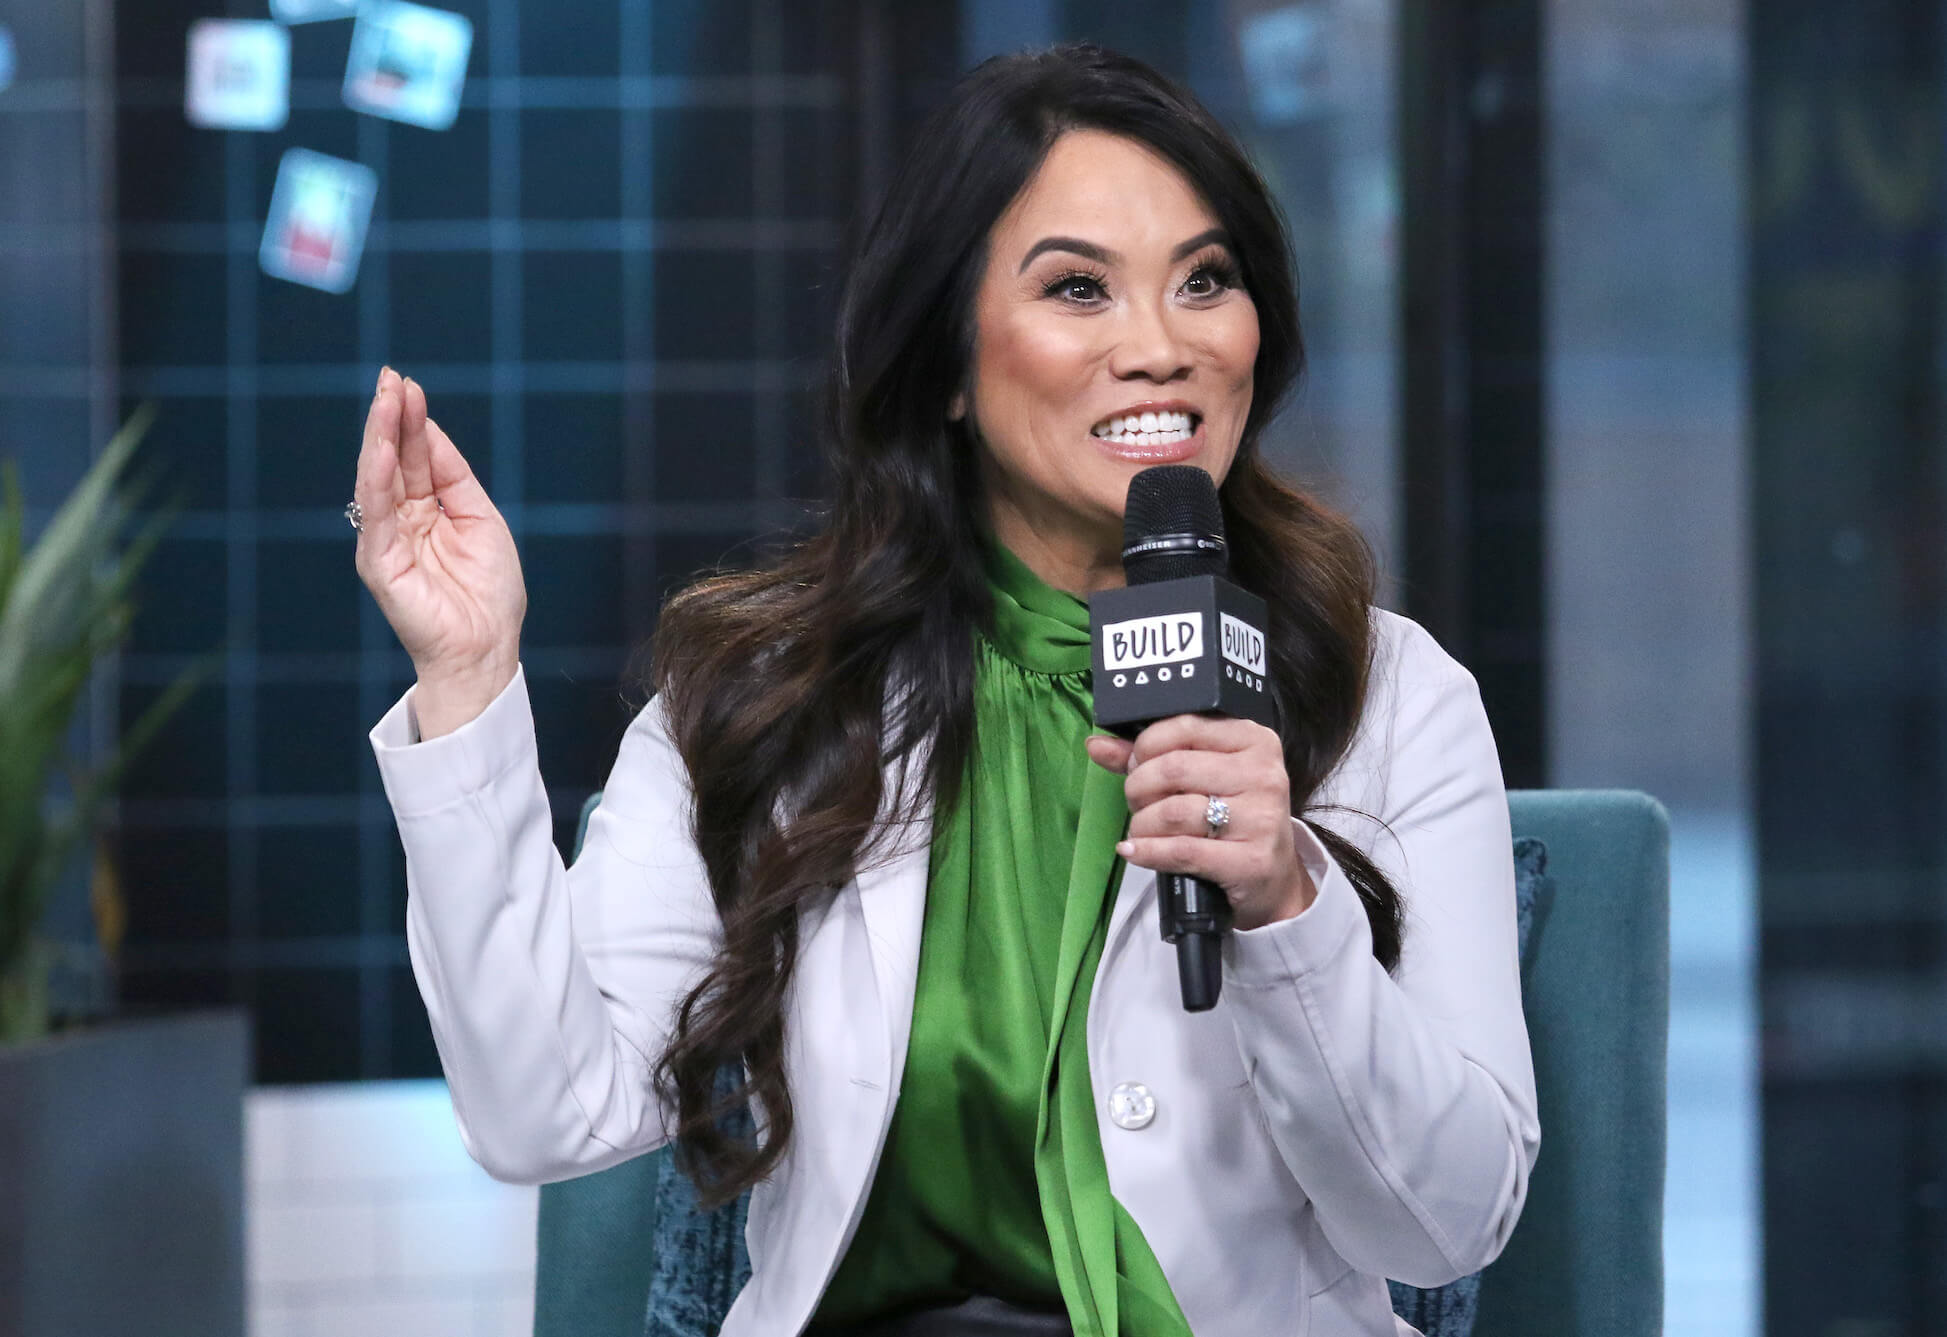 Dr. Sandra Lee from 'Dr. Pimple Popper' smiling and holding a microphone to her mouth